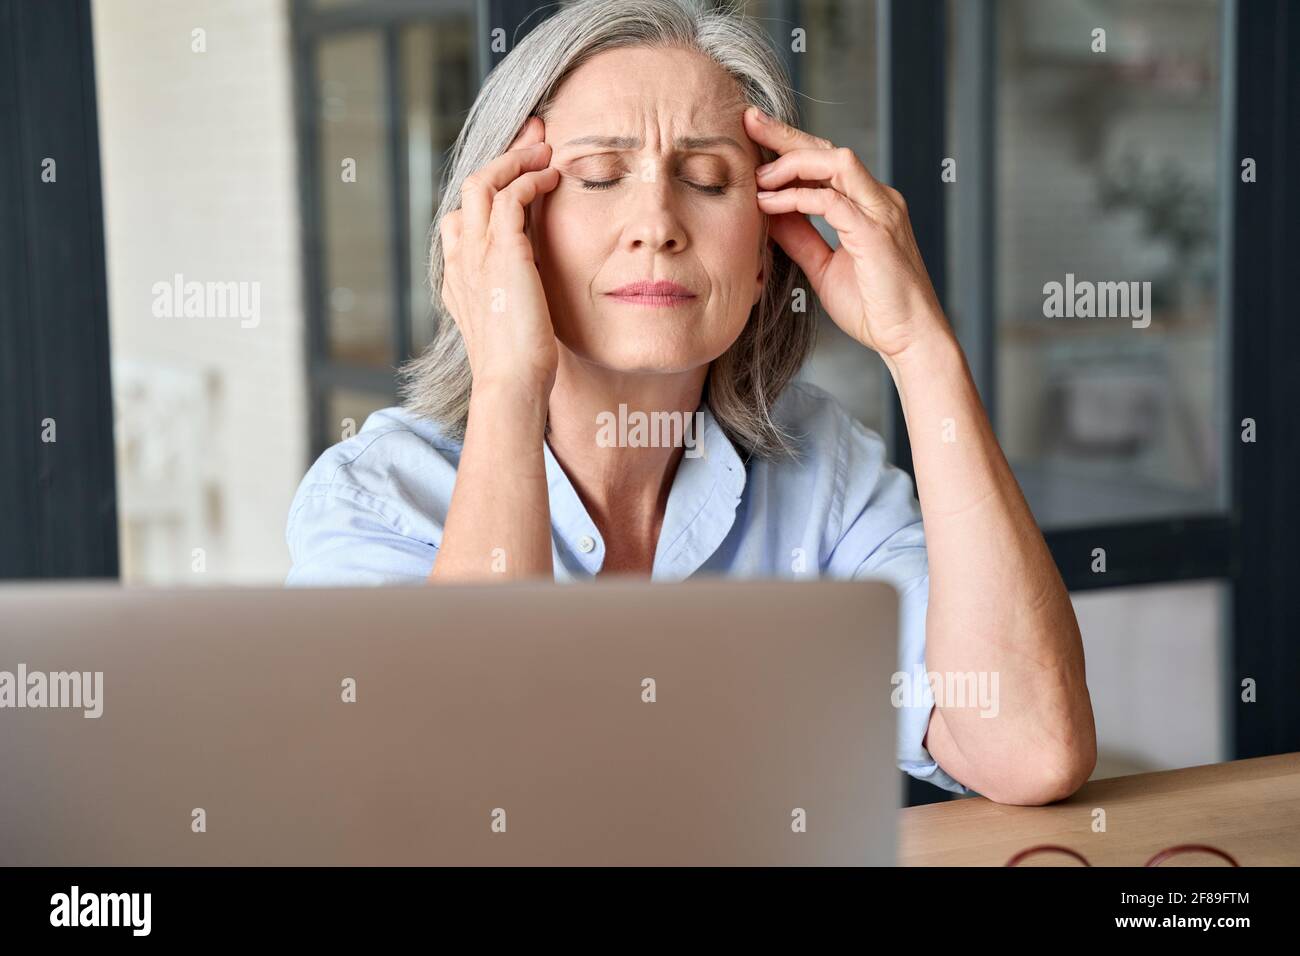 Stressed senior 60s aged massaging head at home office, suffering on workplace. Stock Photo